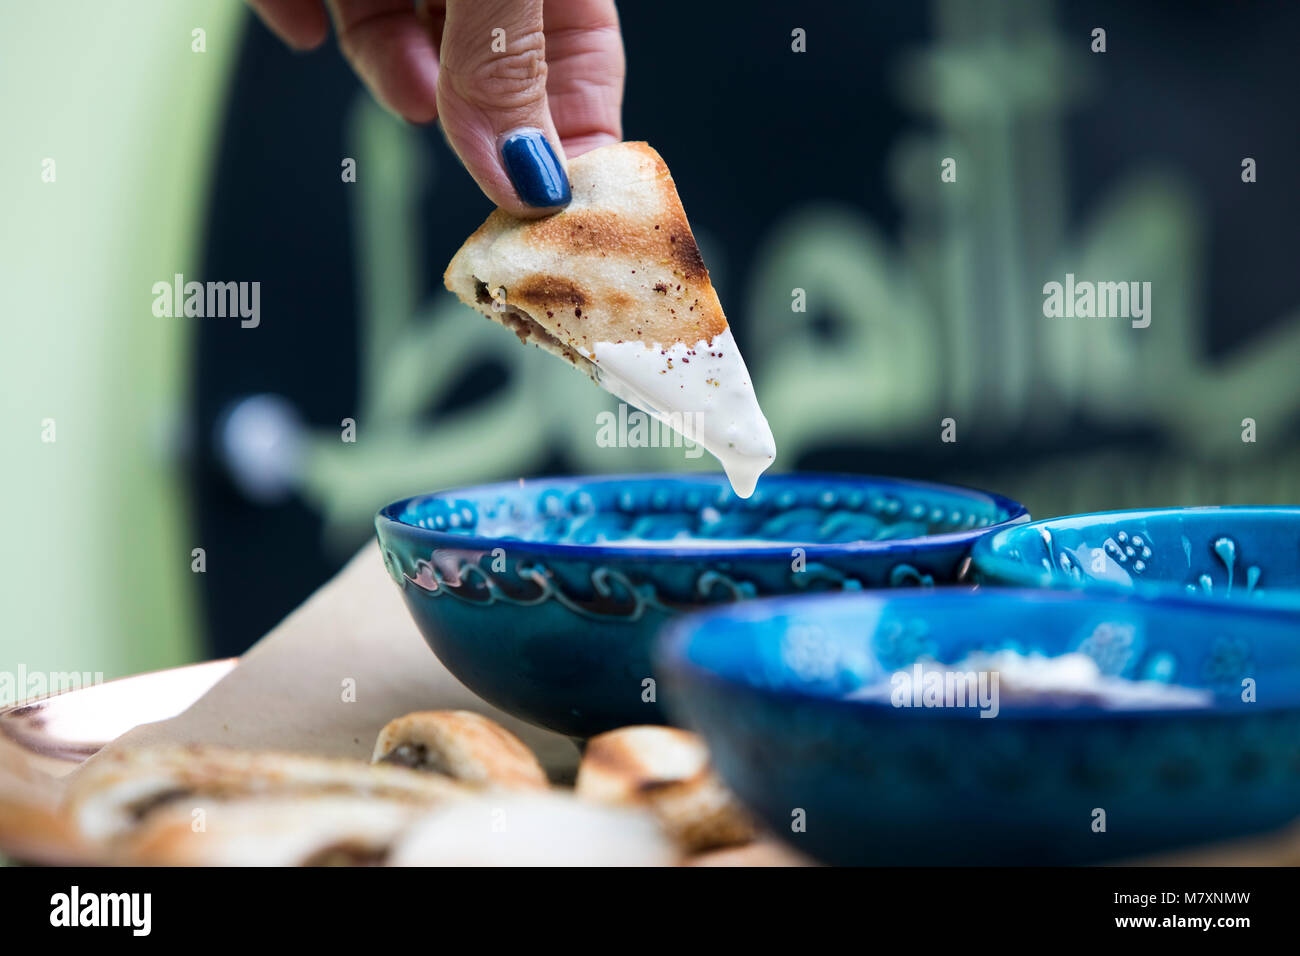 Meat stuffed flatbread being dipped in tahini dip held by womans hand with blue nails.  Blue bowl.  Middle Eastern. Stock Photo